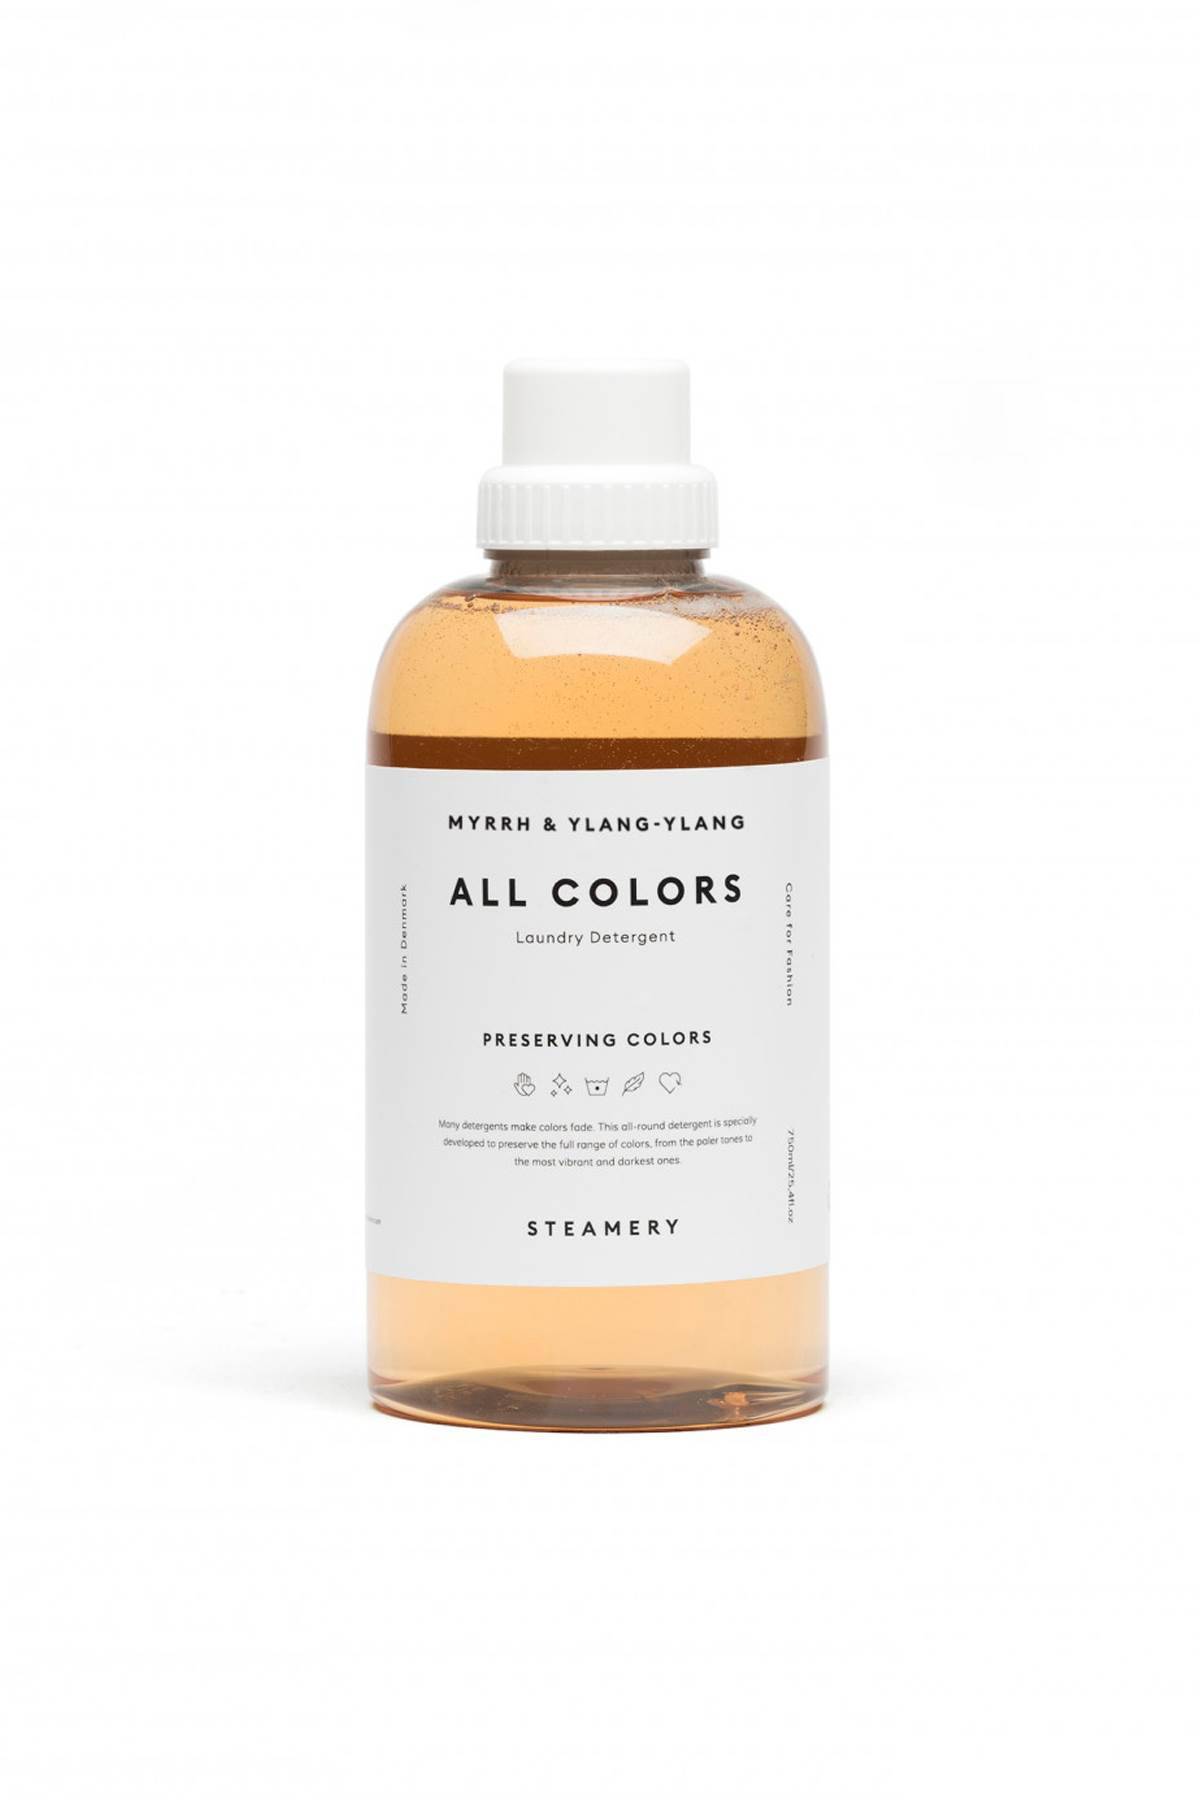 STEAMERY STEAMERY all colors laundry detergent